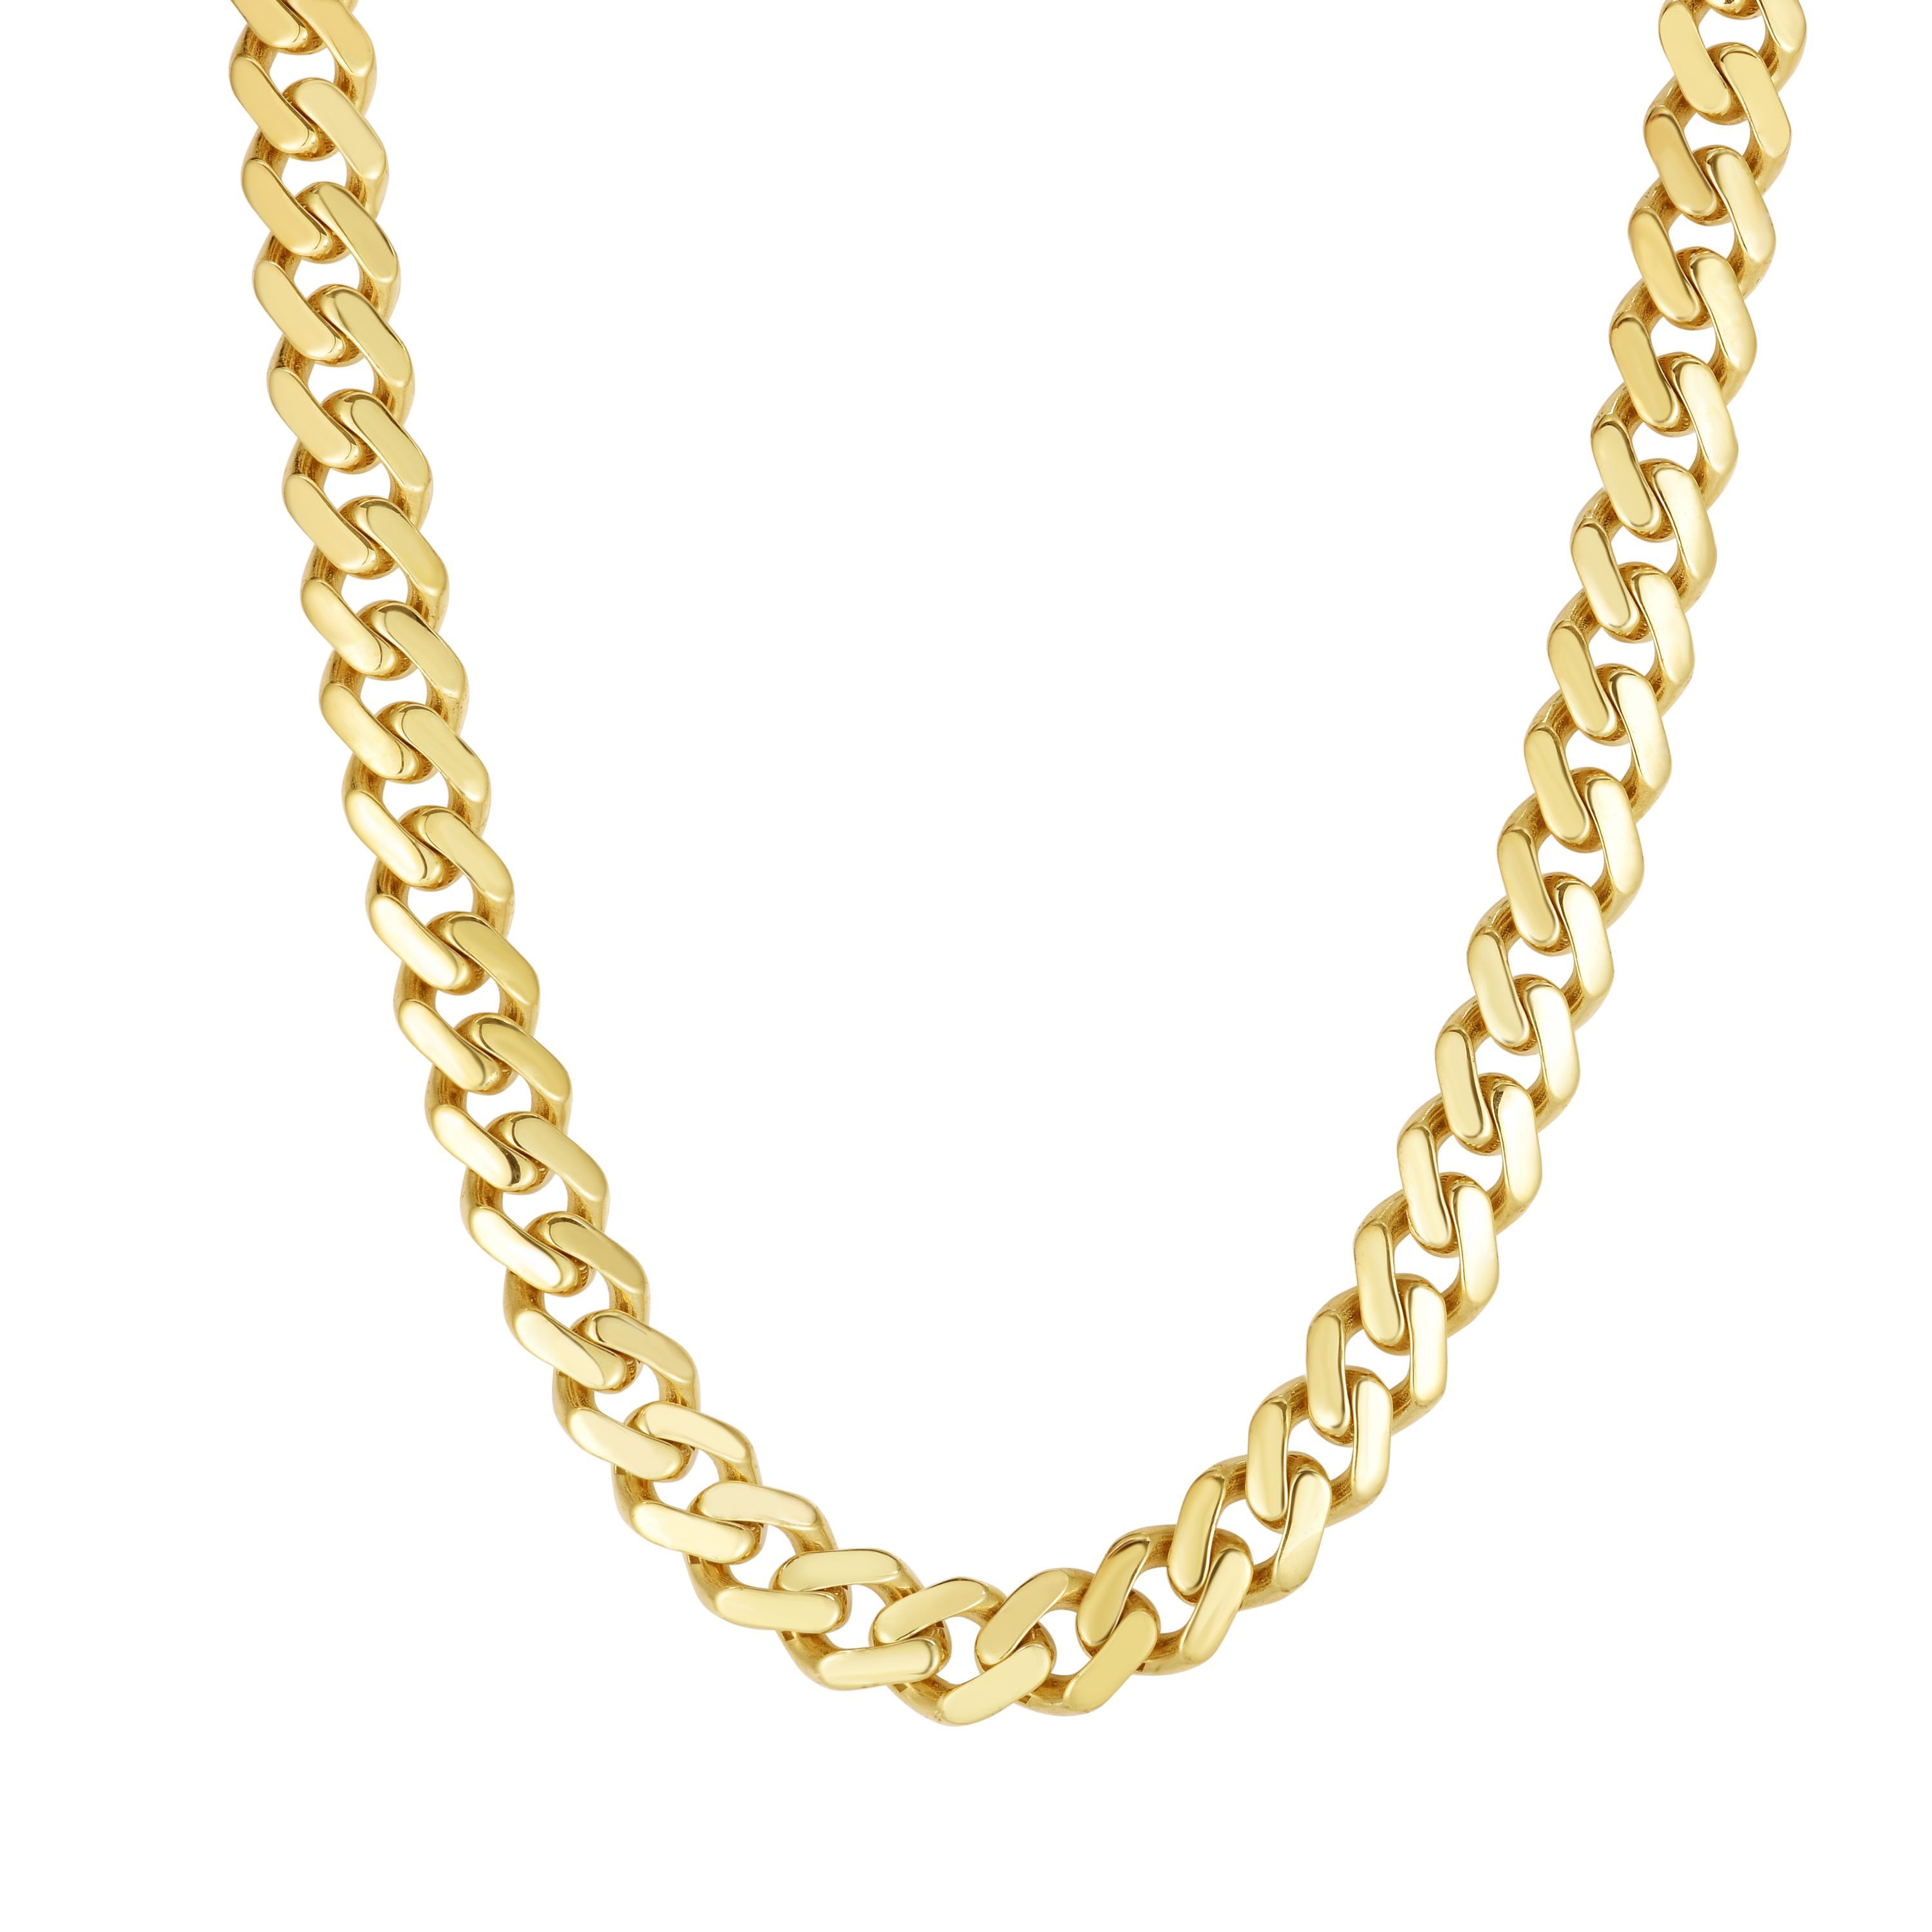 Jewelry Affairs 14k Yellow Gold Miami Cuban Link Chain Necklace, Width 9.5mm, 22"